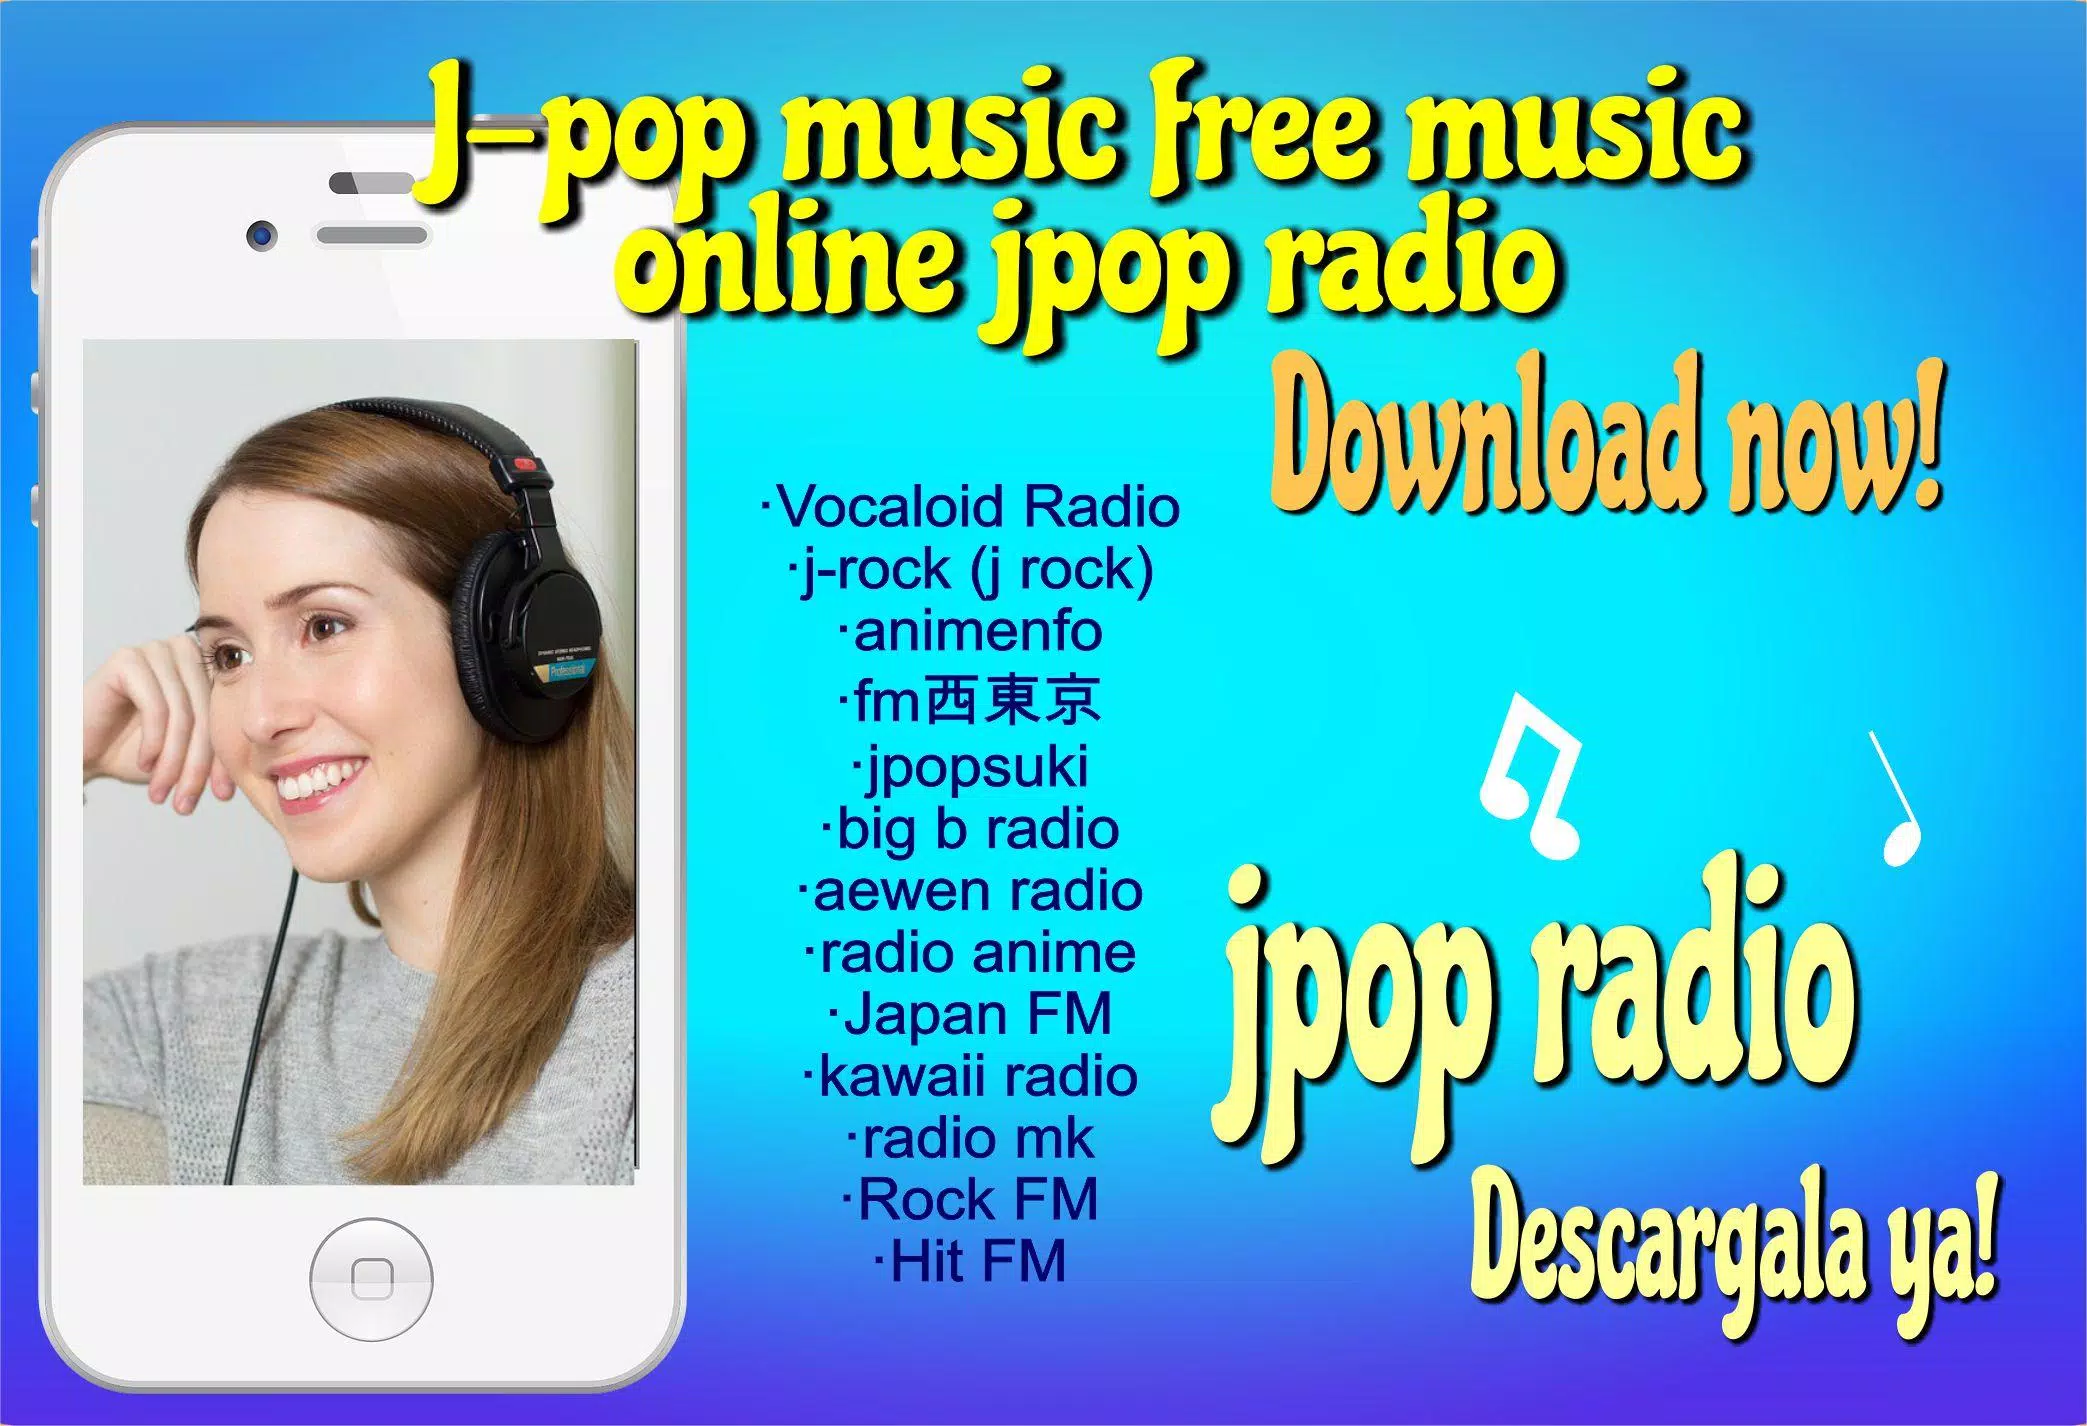 J-pop music free music online jpop radio for Android - APK Download